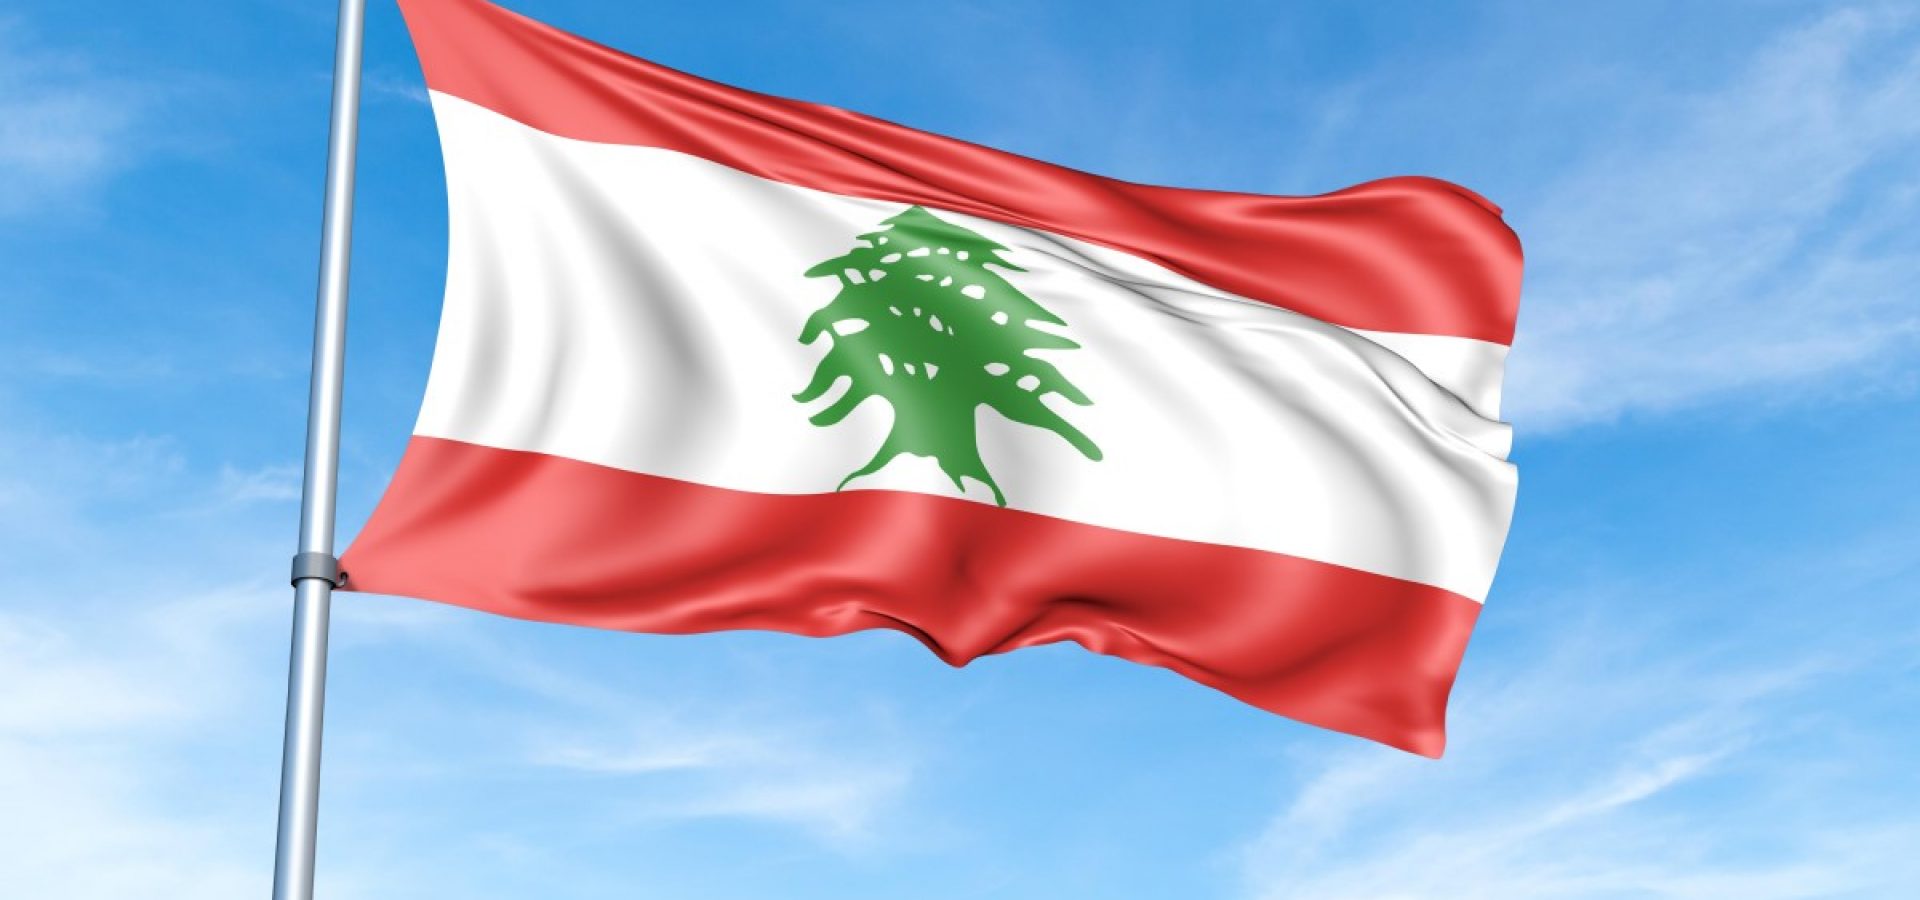 Lebanon and a digital currency